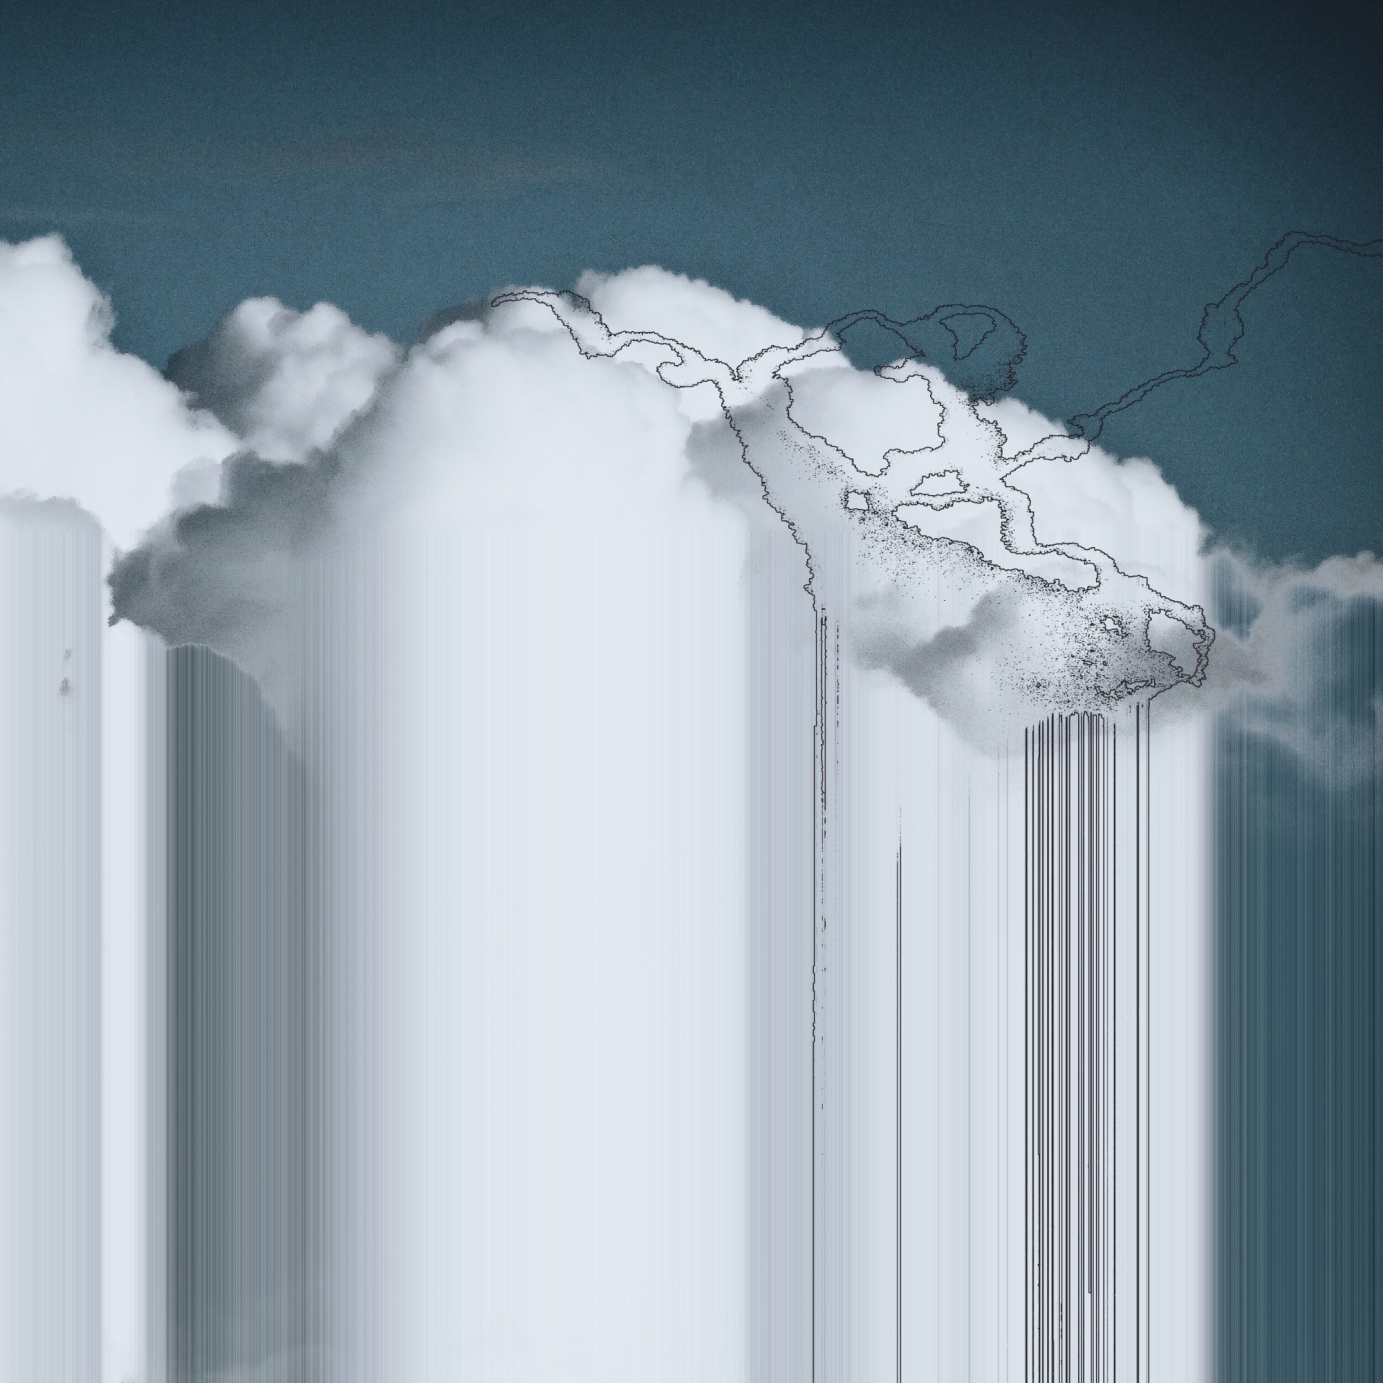 The Aesthetics of Imperfection - Cloud #1